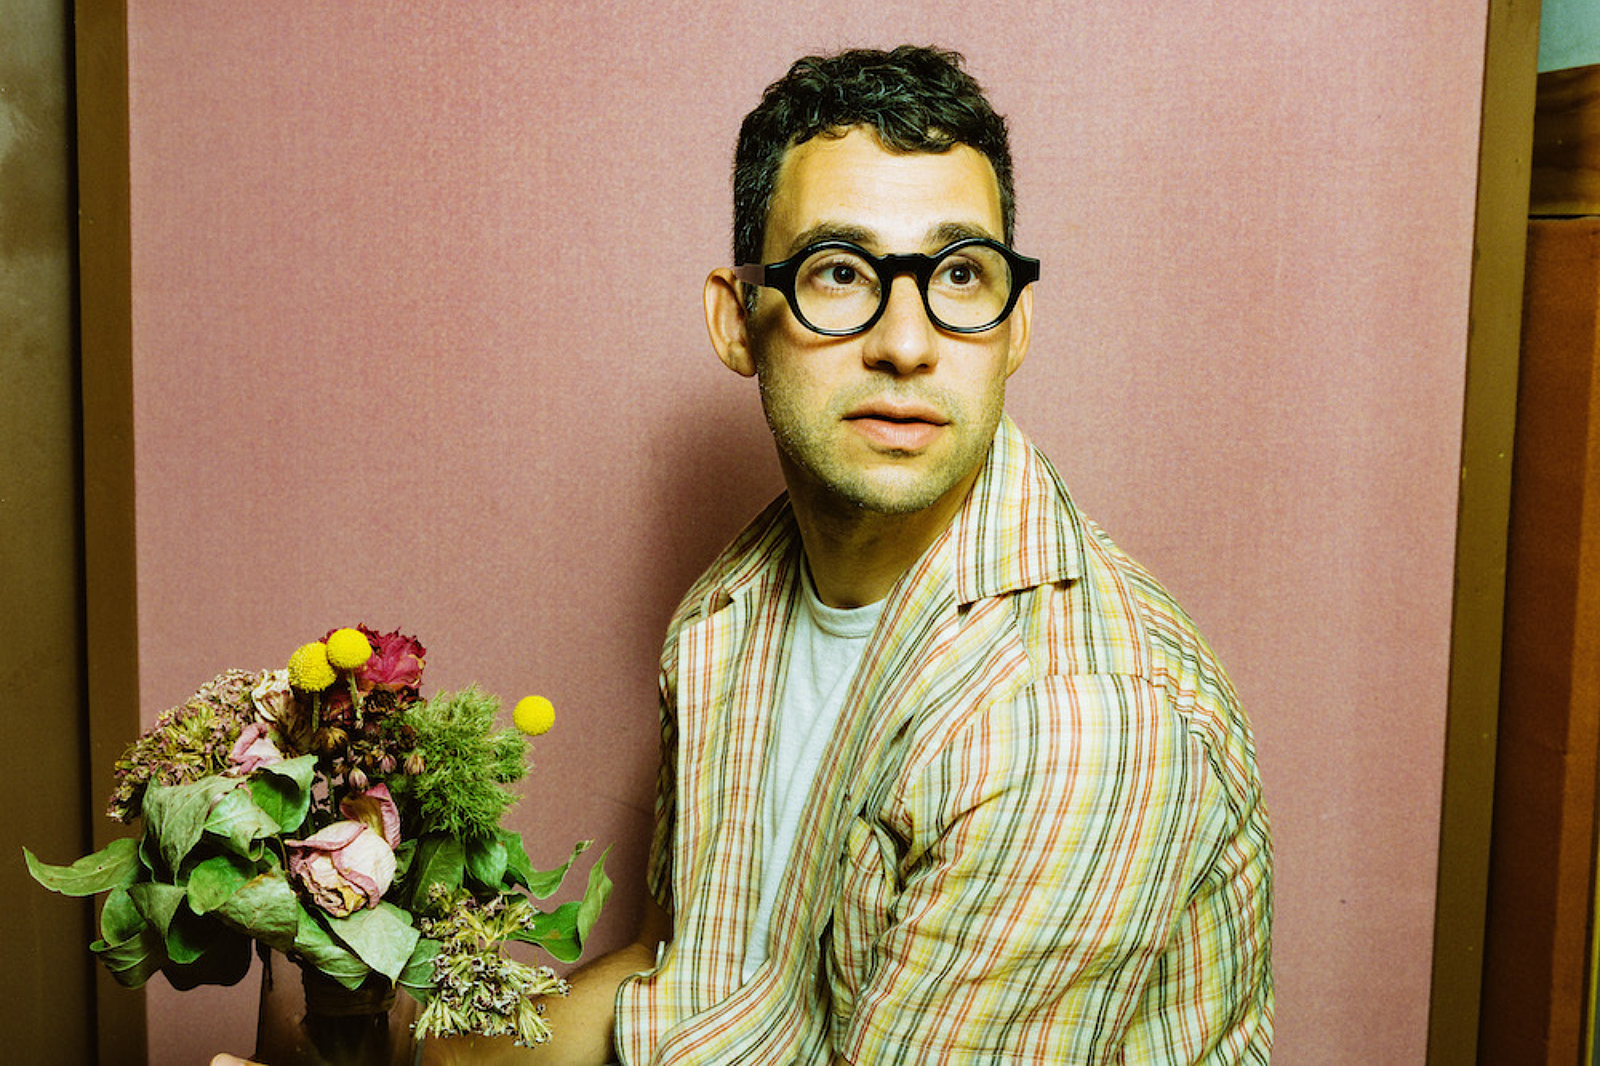 A new Bleachers album is coming "this year"